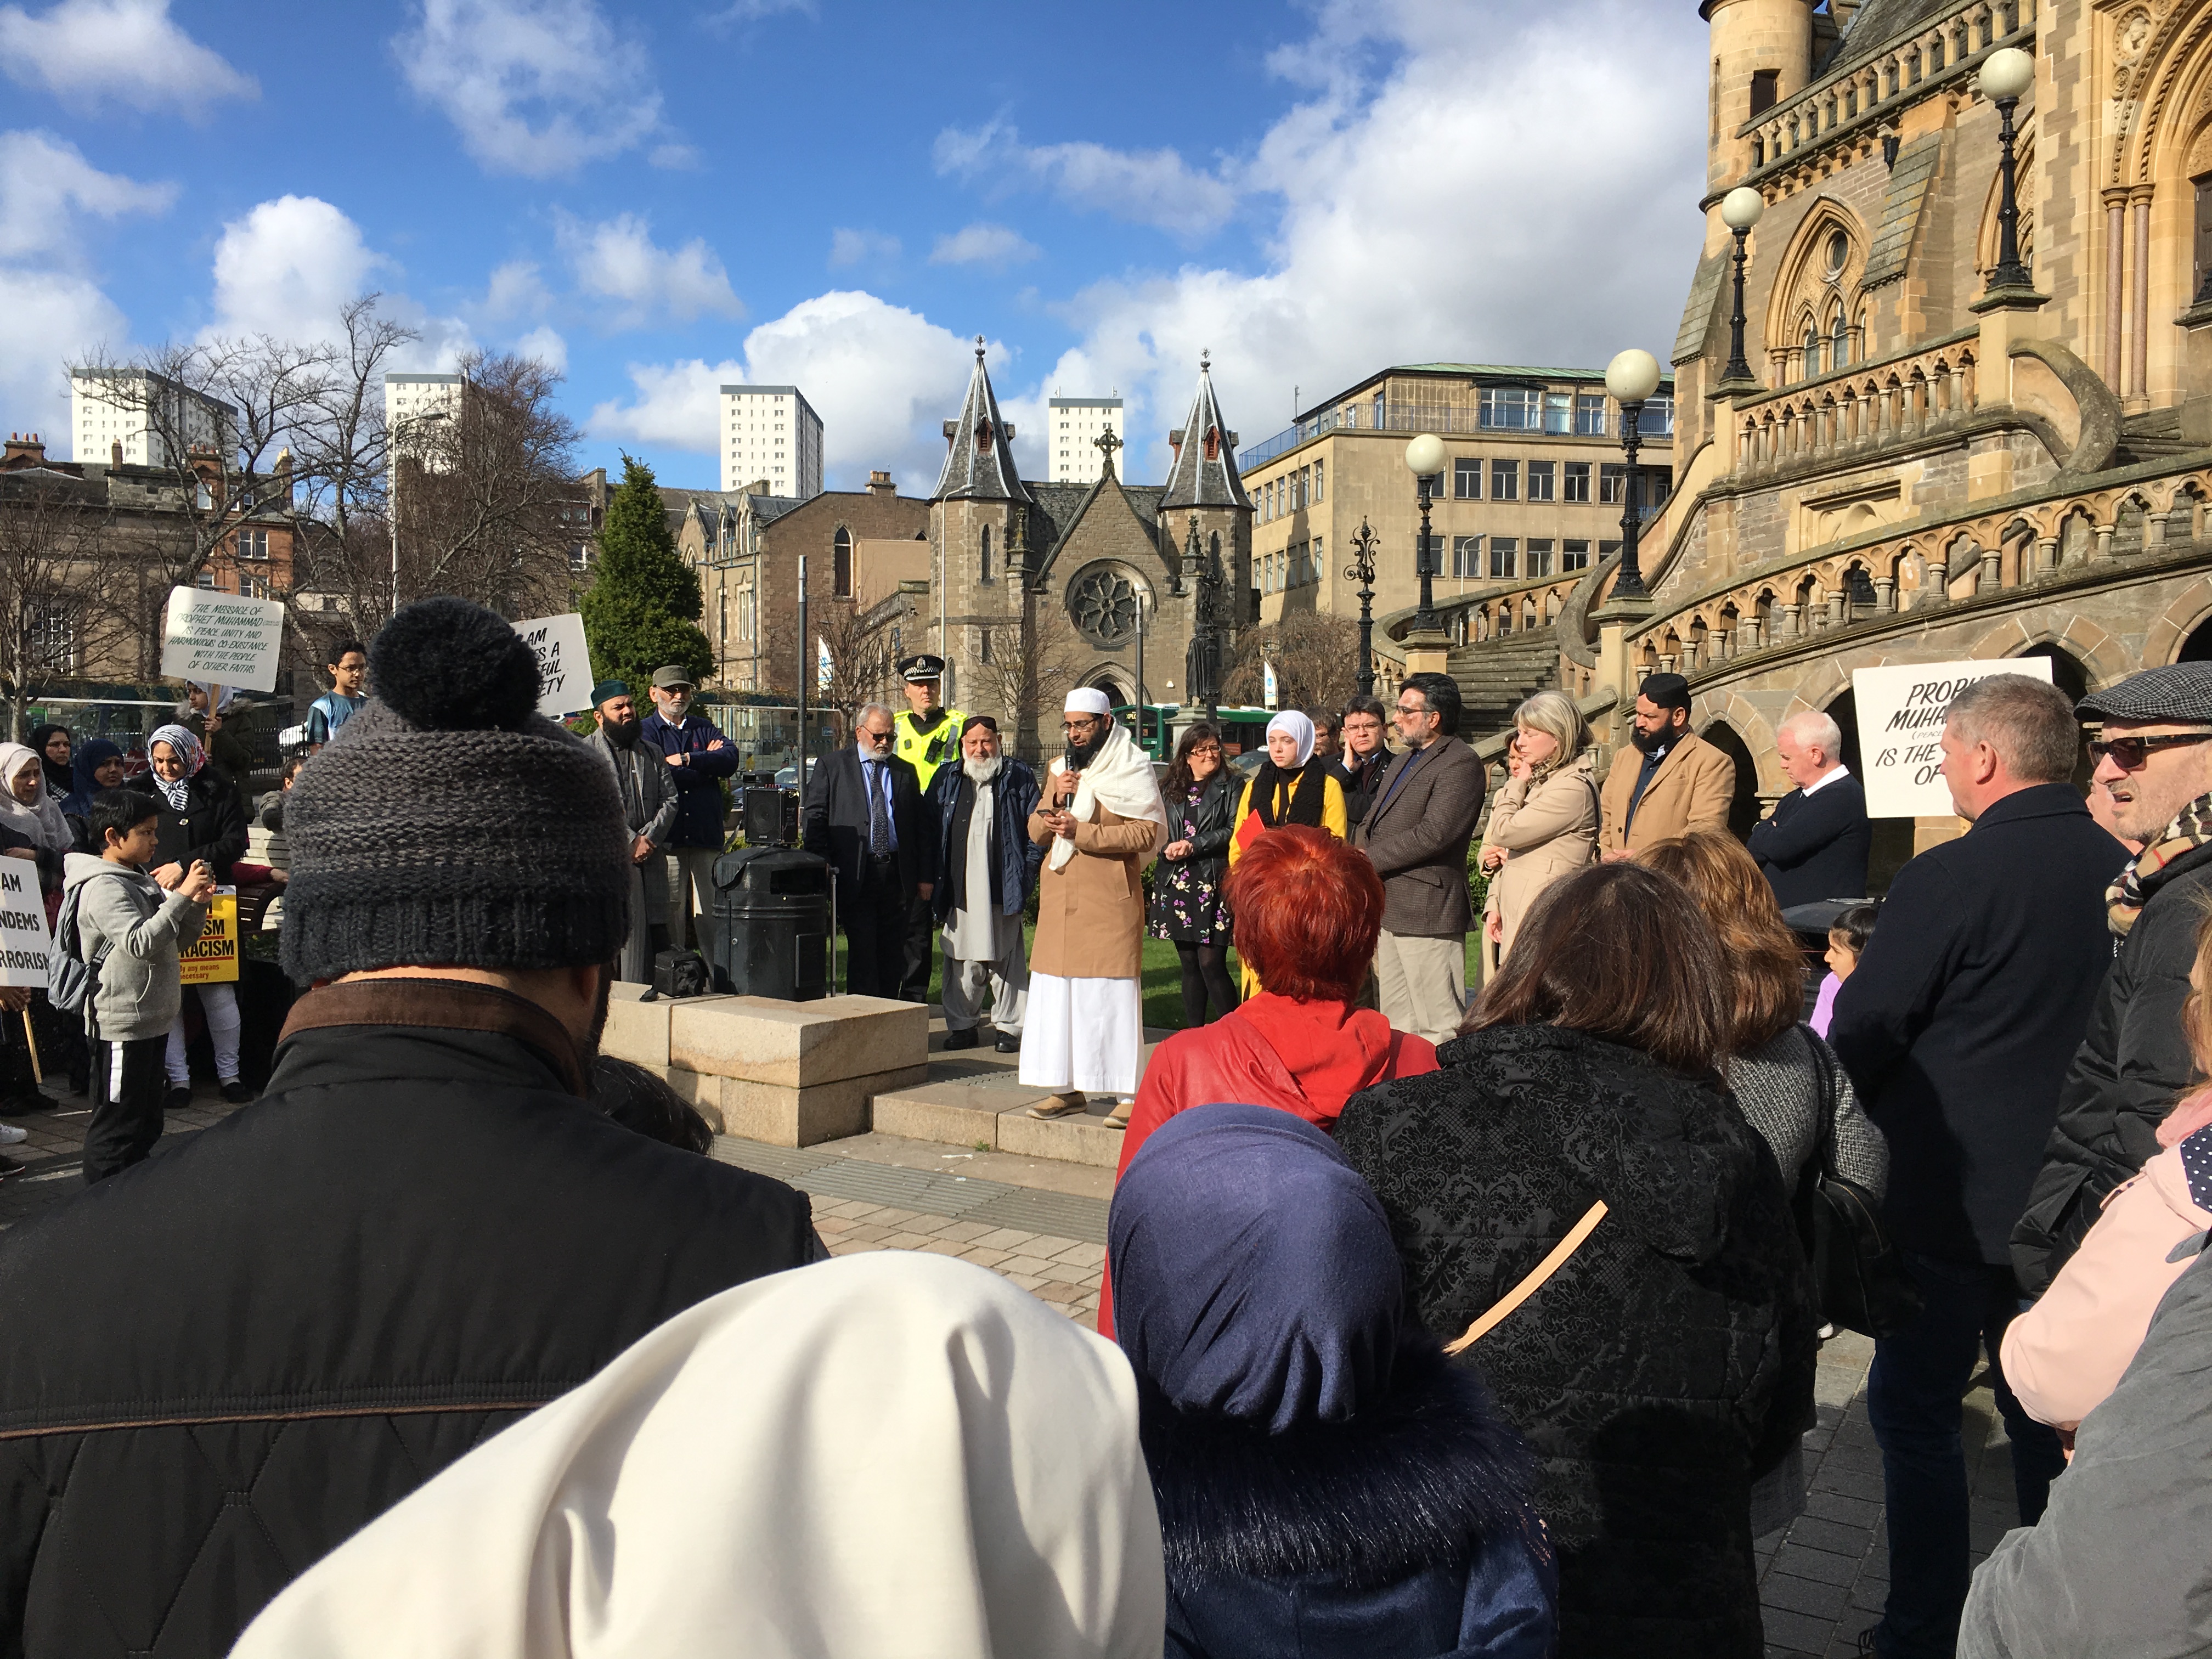 Imam Hamza from Central Mosque addresses Saturday's rally.